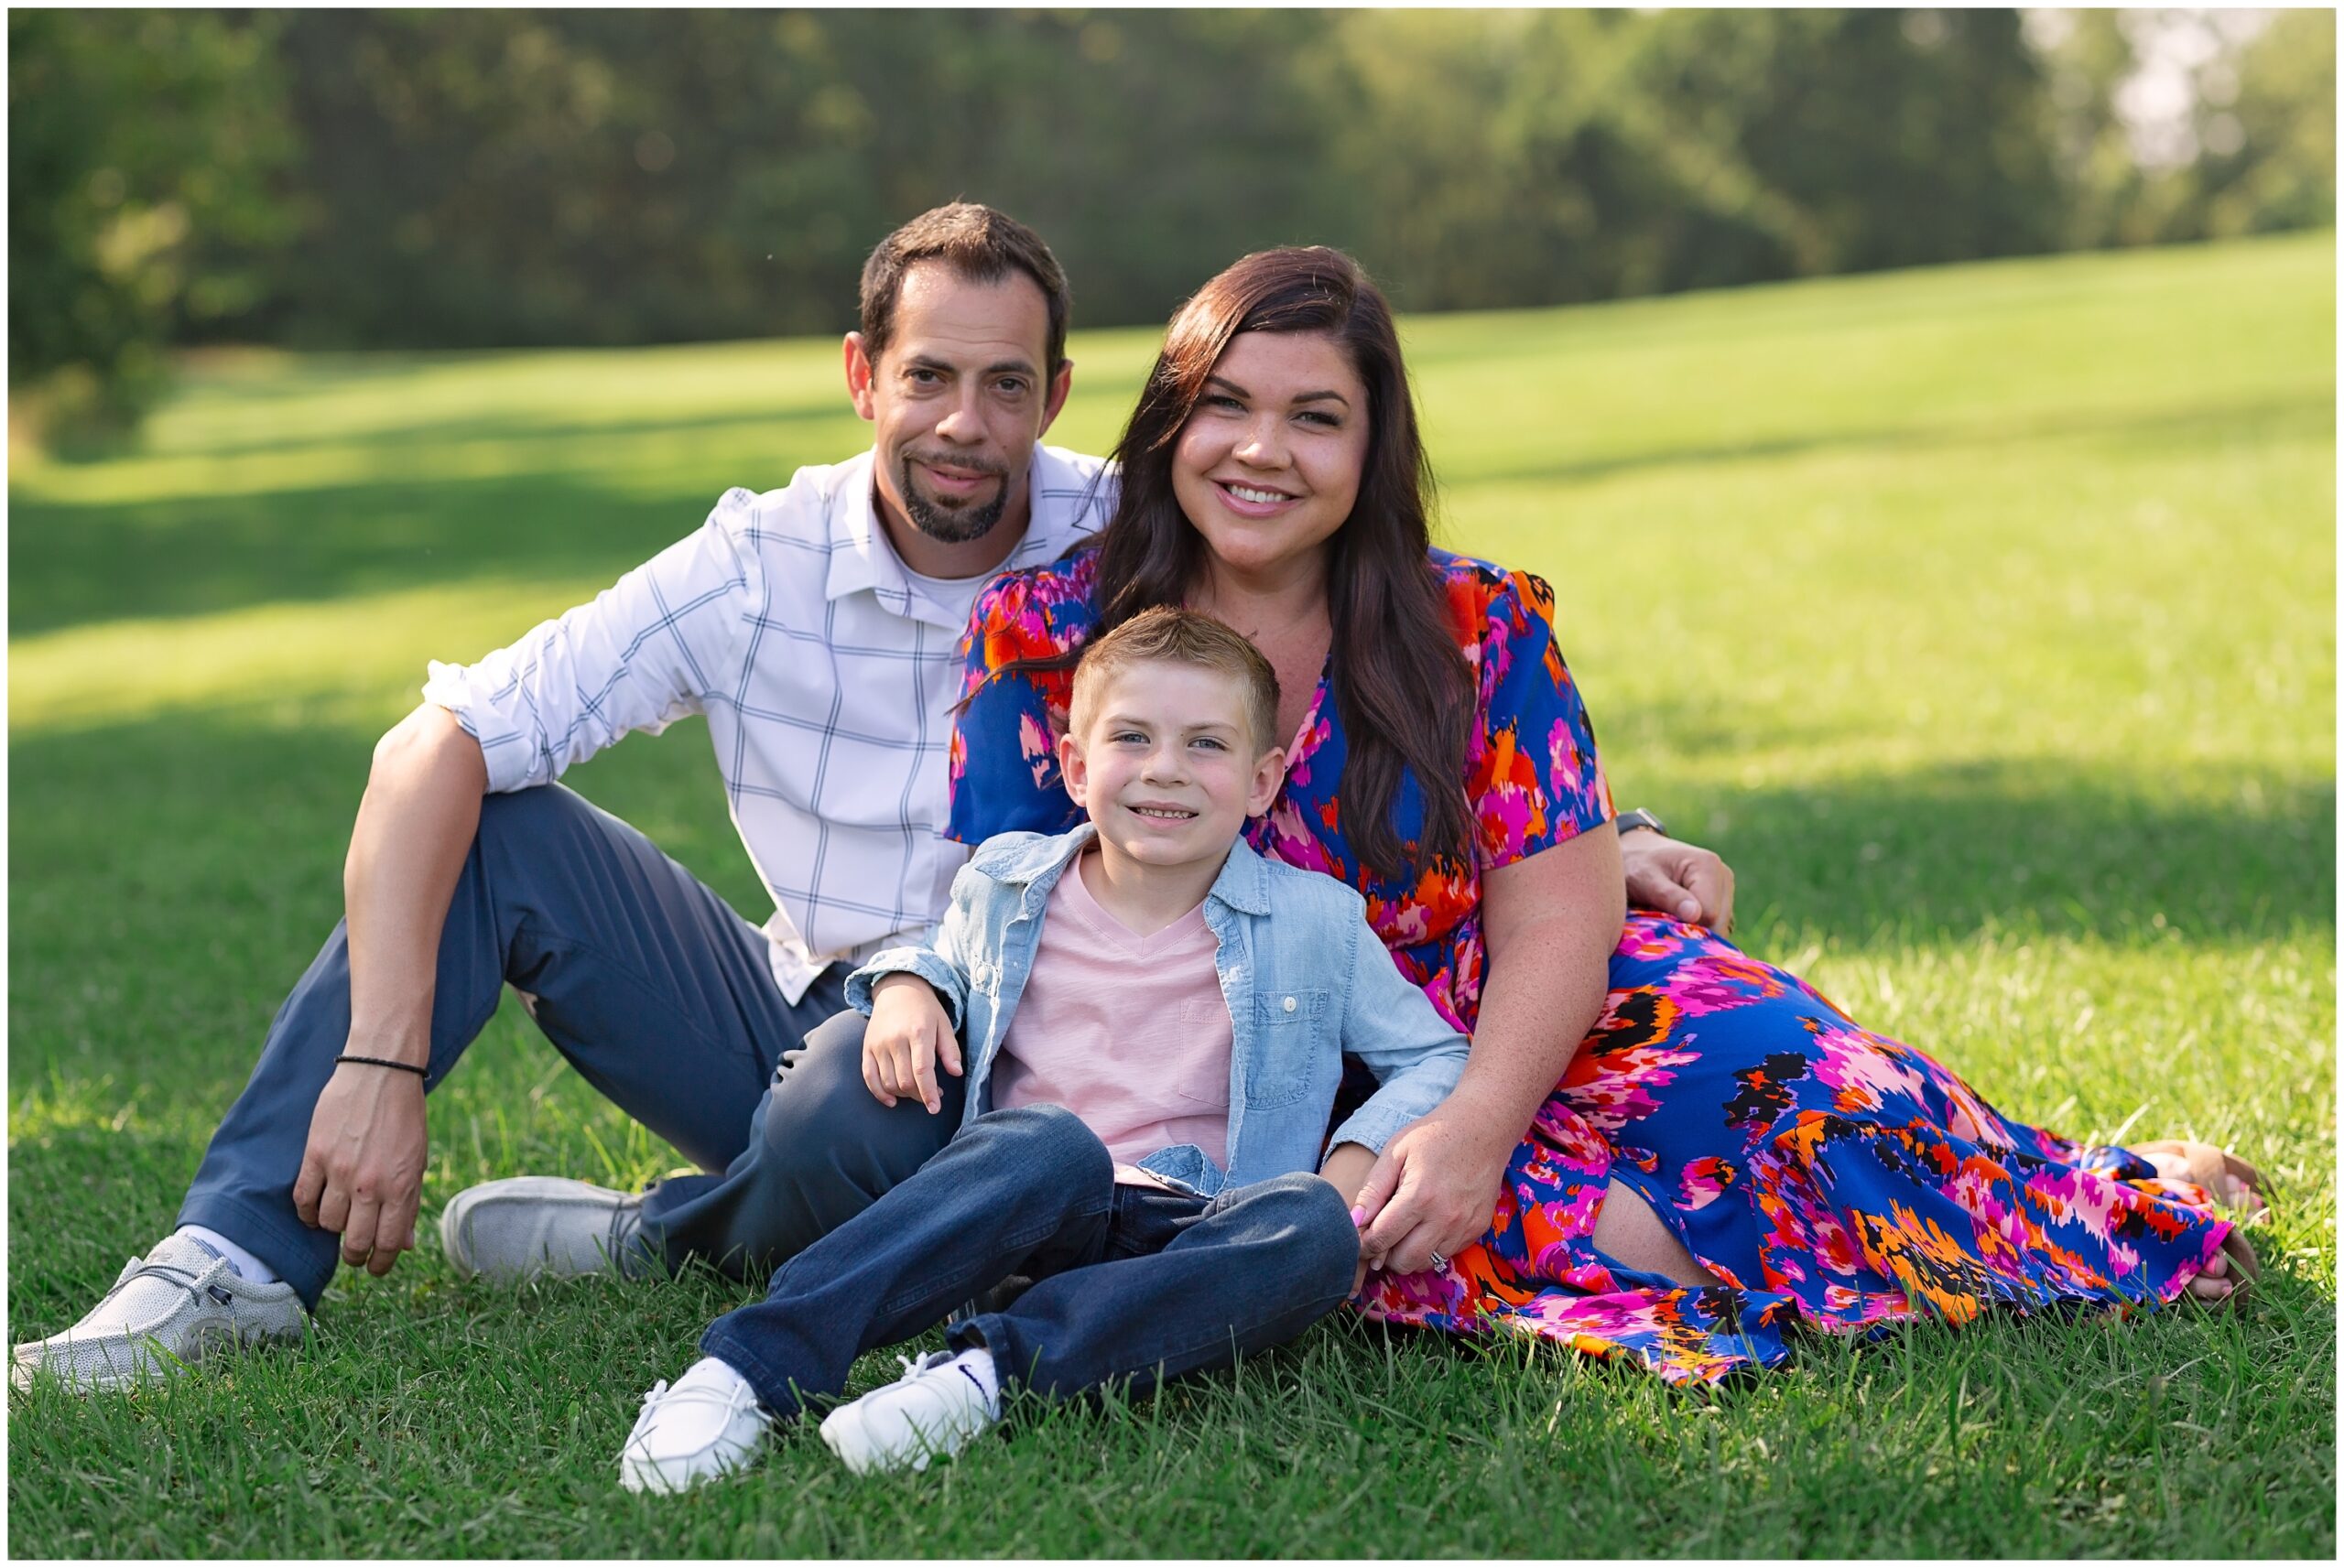 Outdoor Family Portrait Session in Boyce Park located in Plum, PA